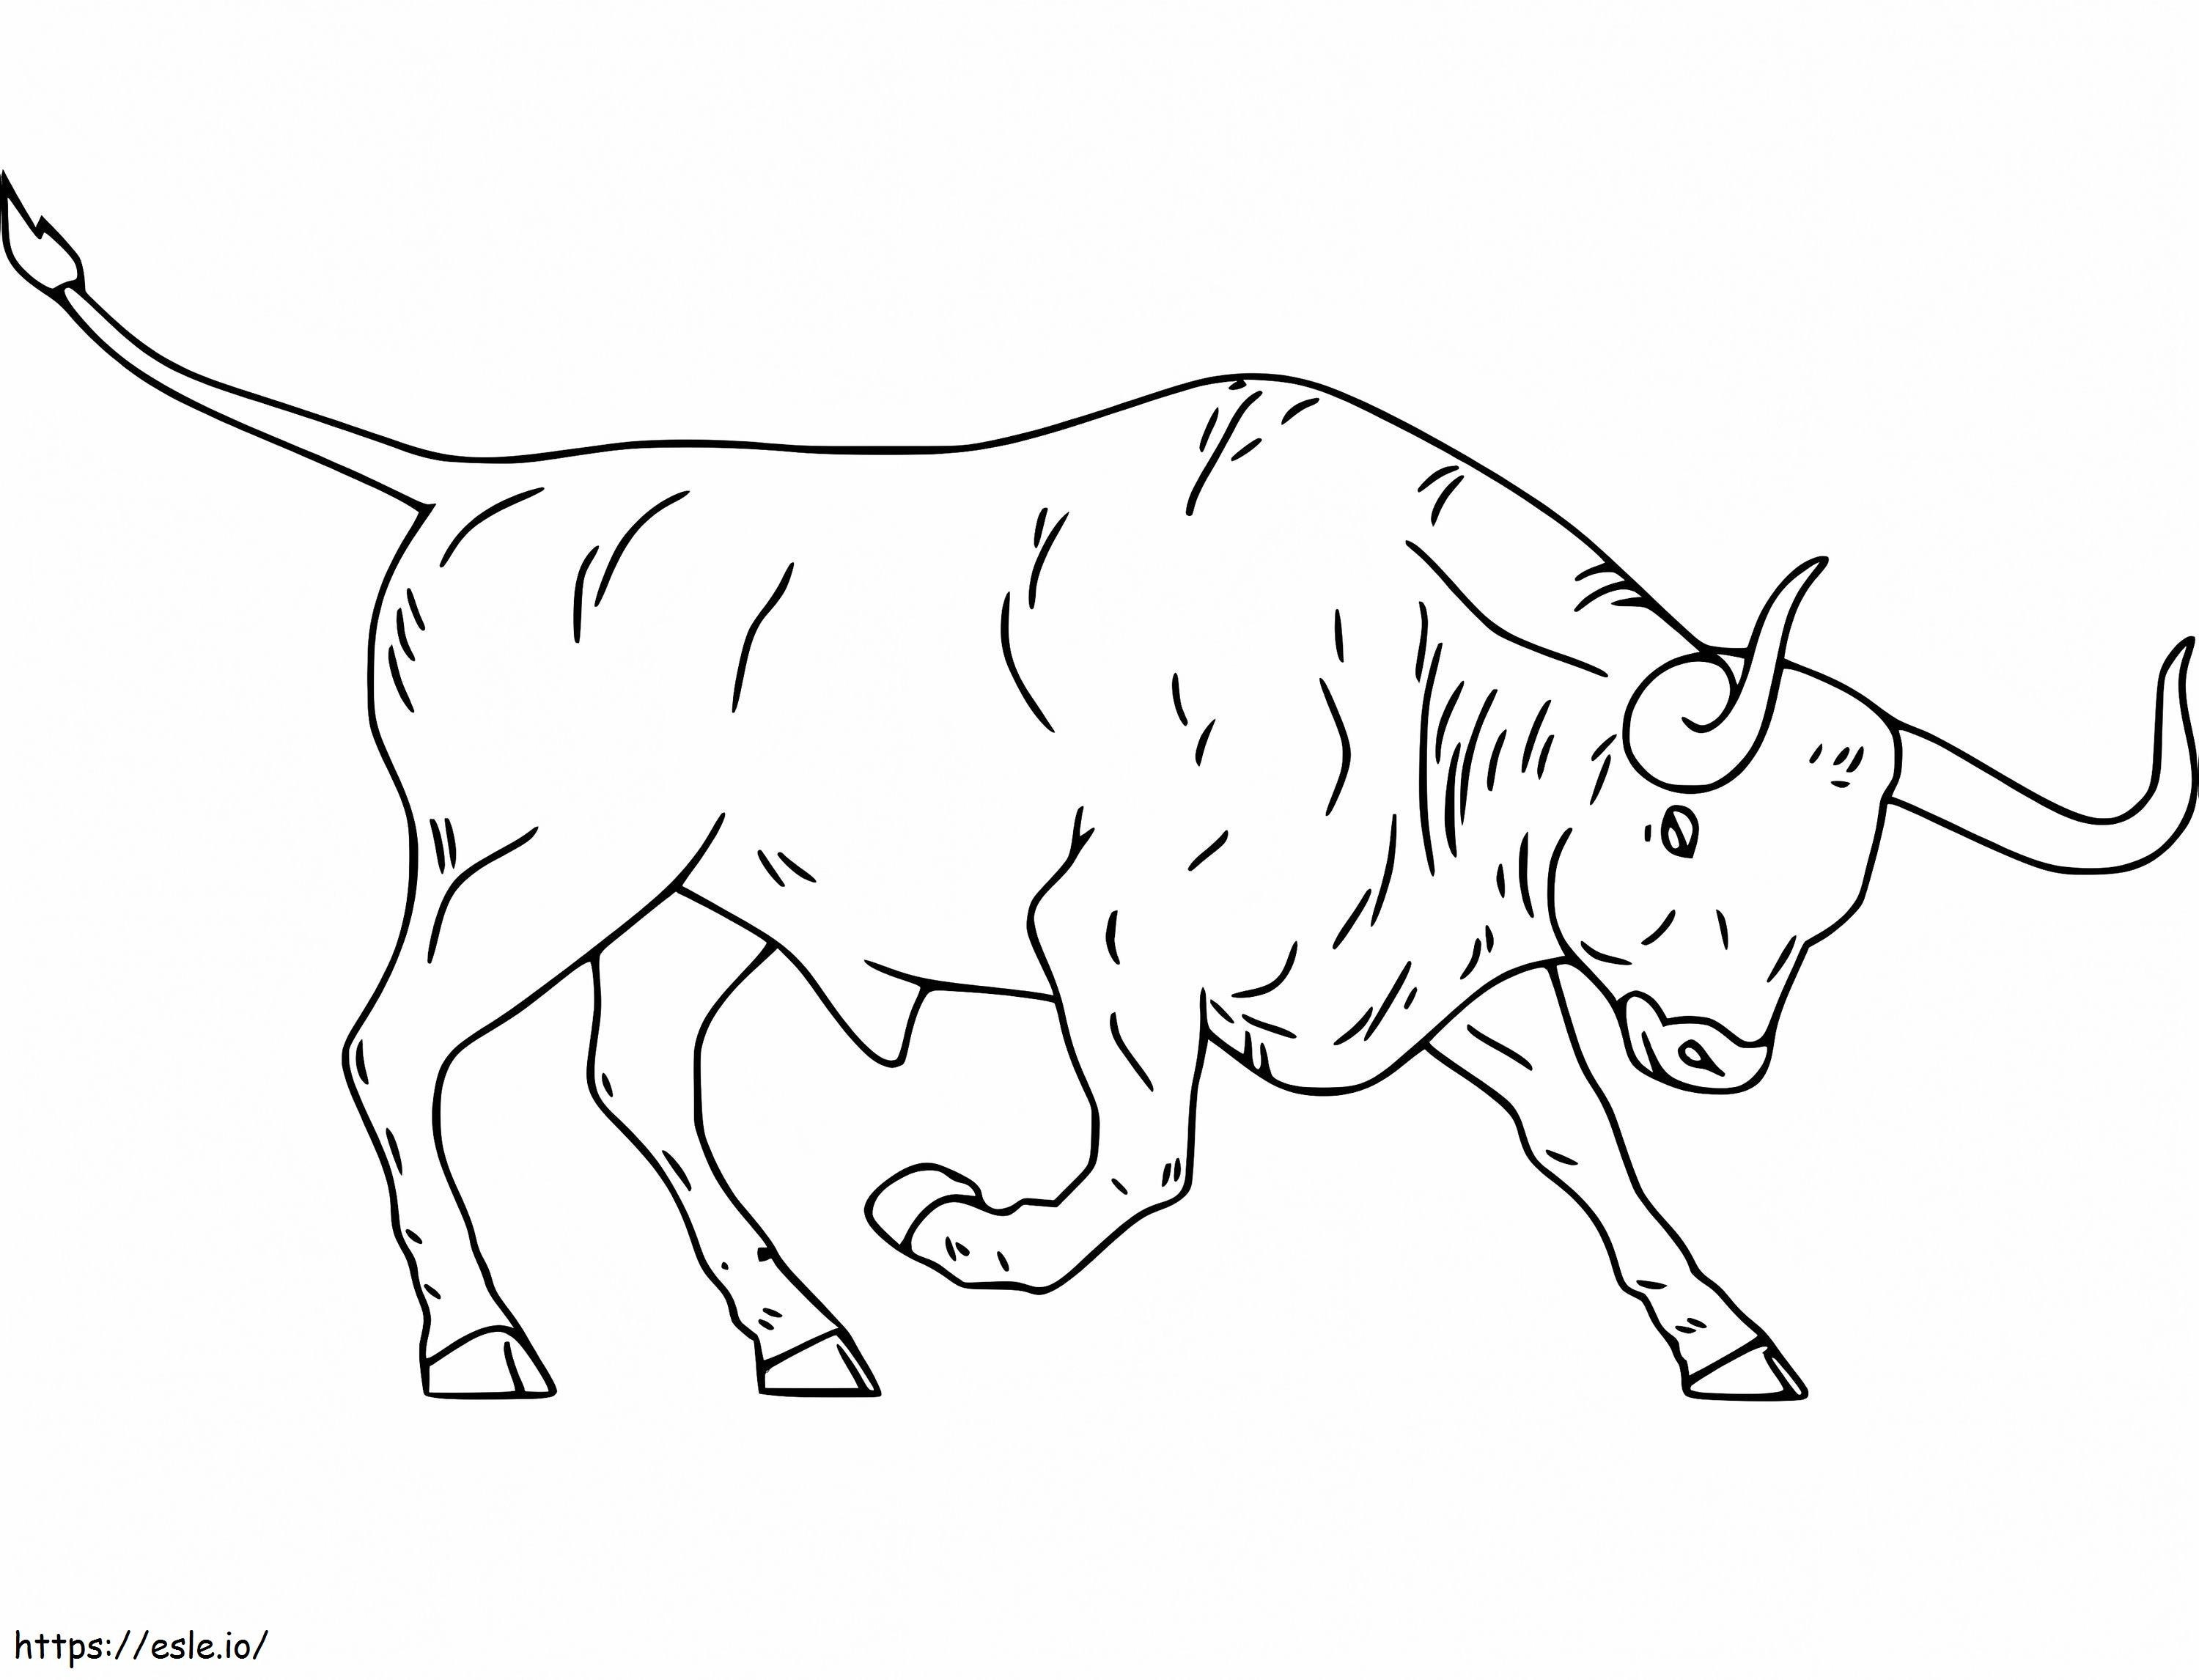 Bull 5 coloring page